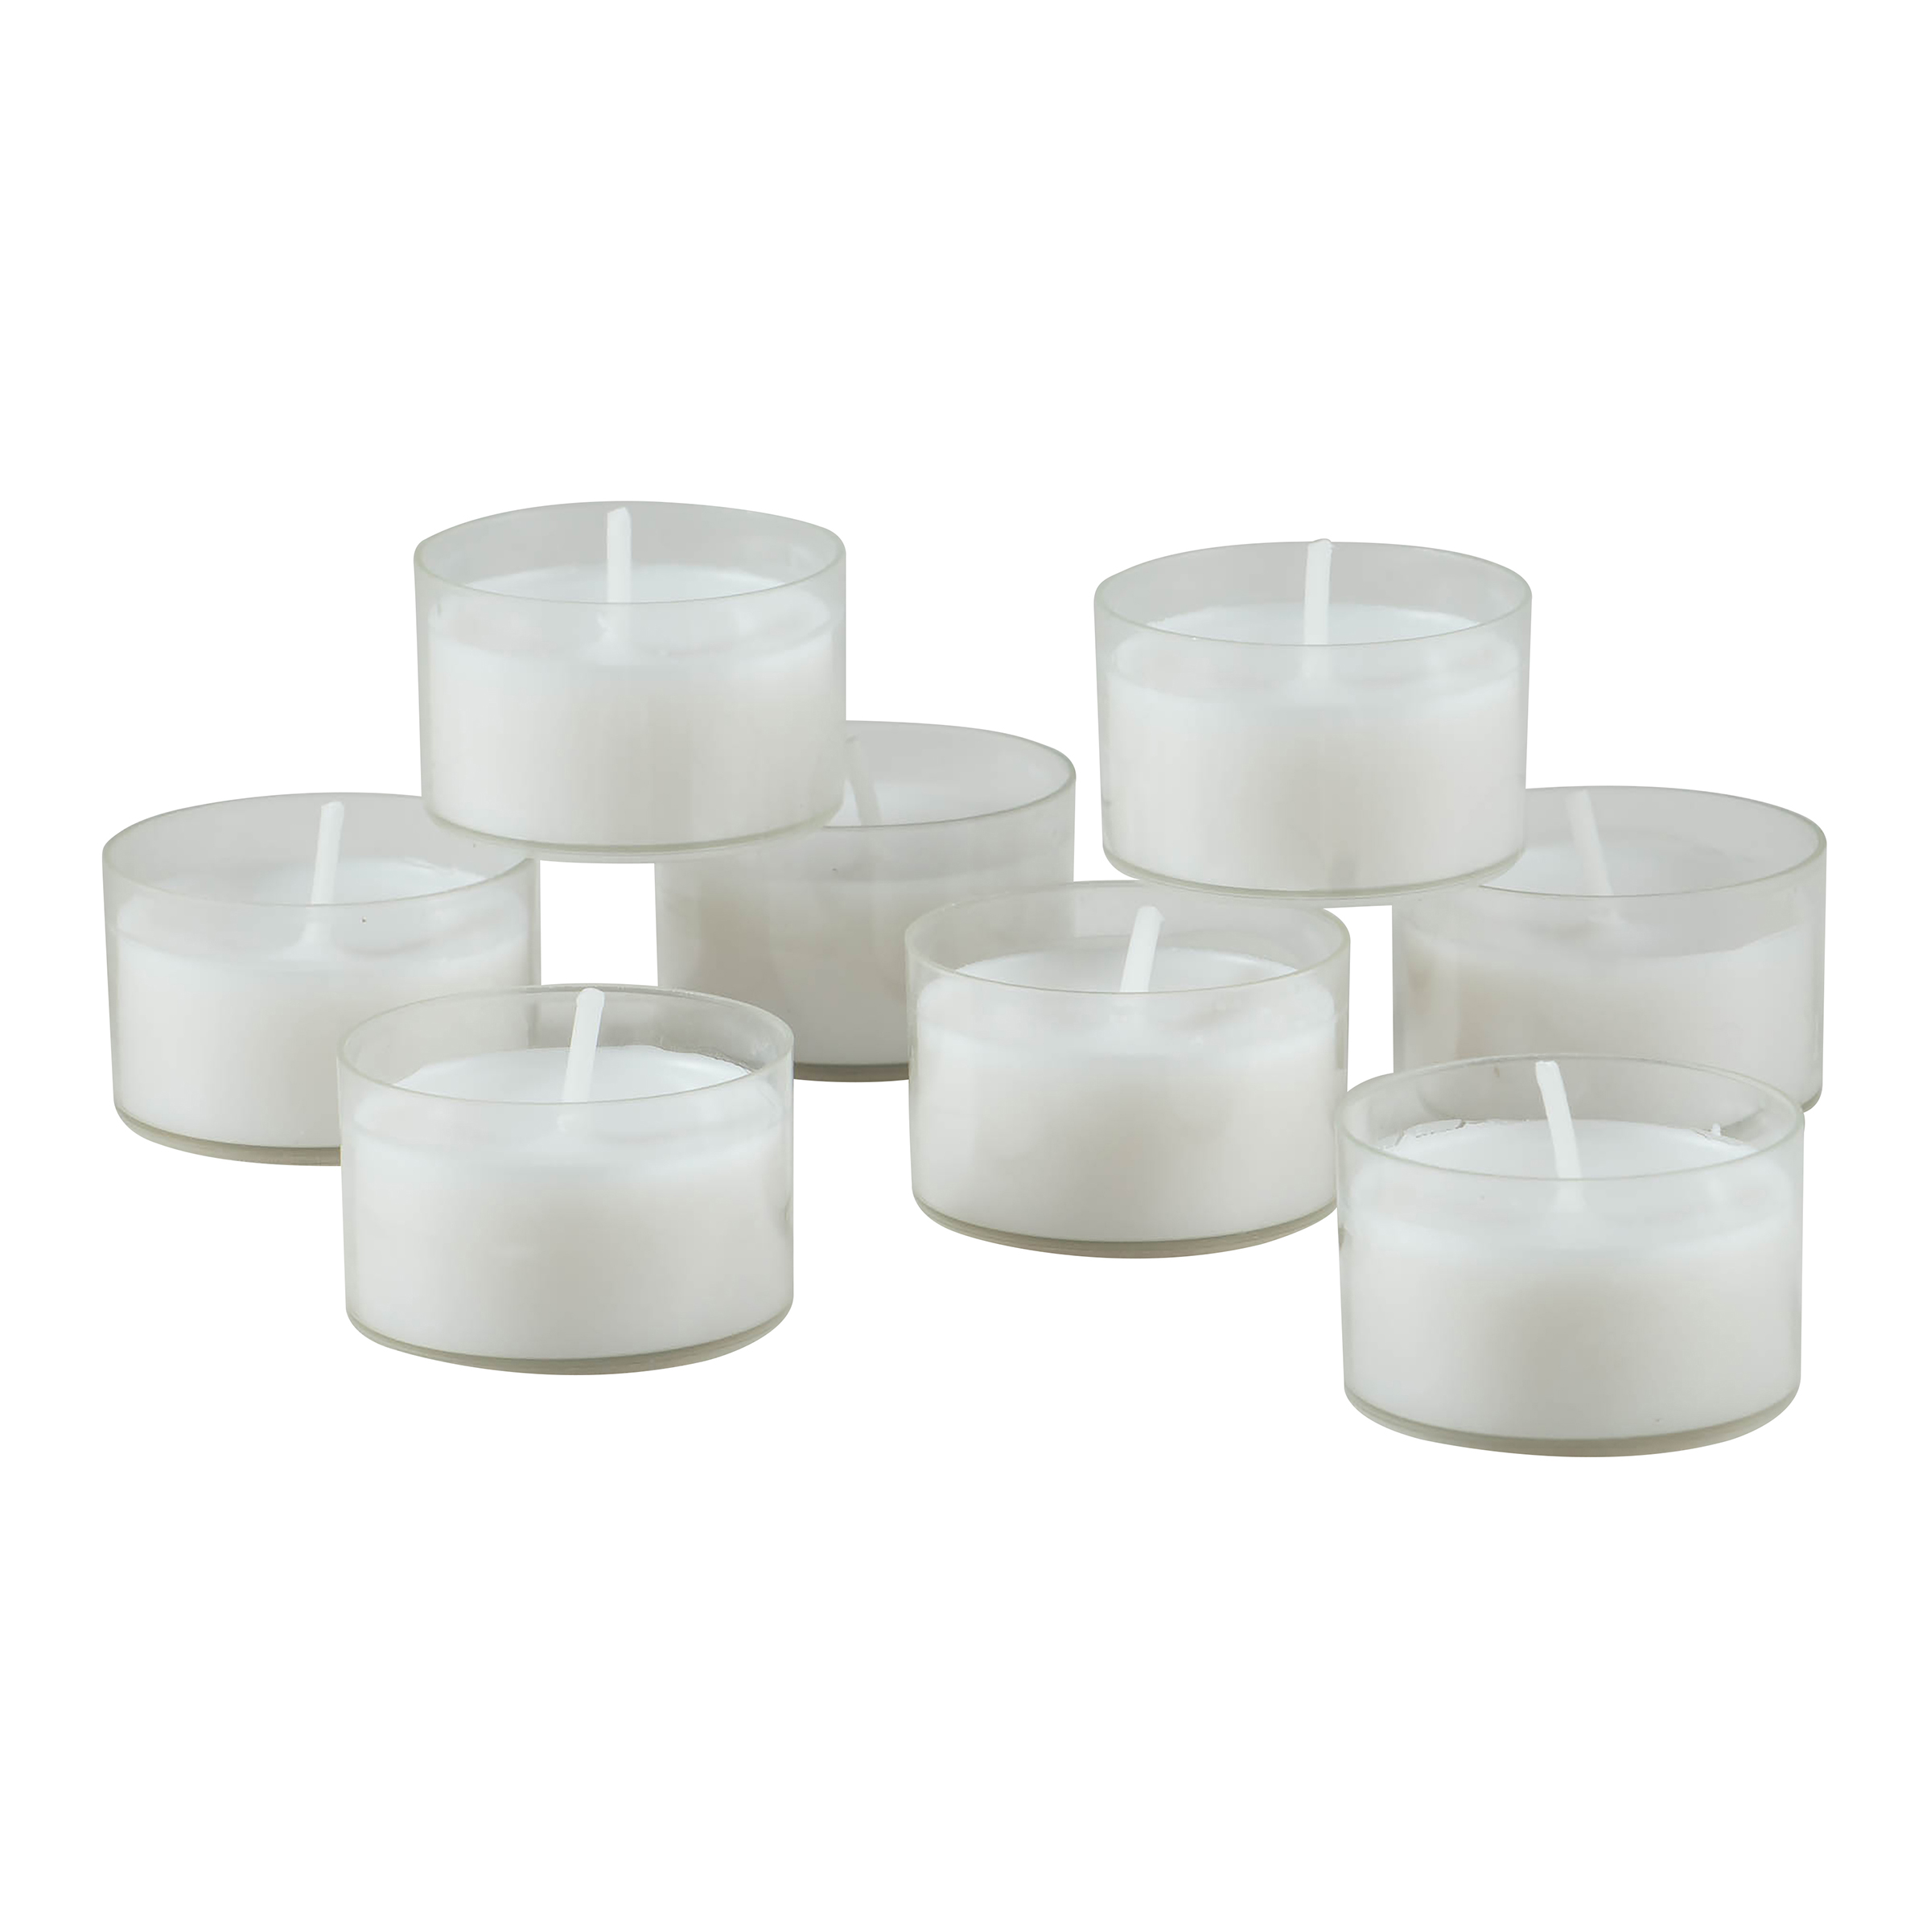 Stonebriar Unscented Long Burning Clear Cup Tealight Candles with 6-7 Hour Burn Time, 96 Pack, White - image 4 of 8